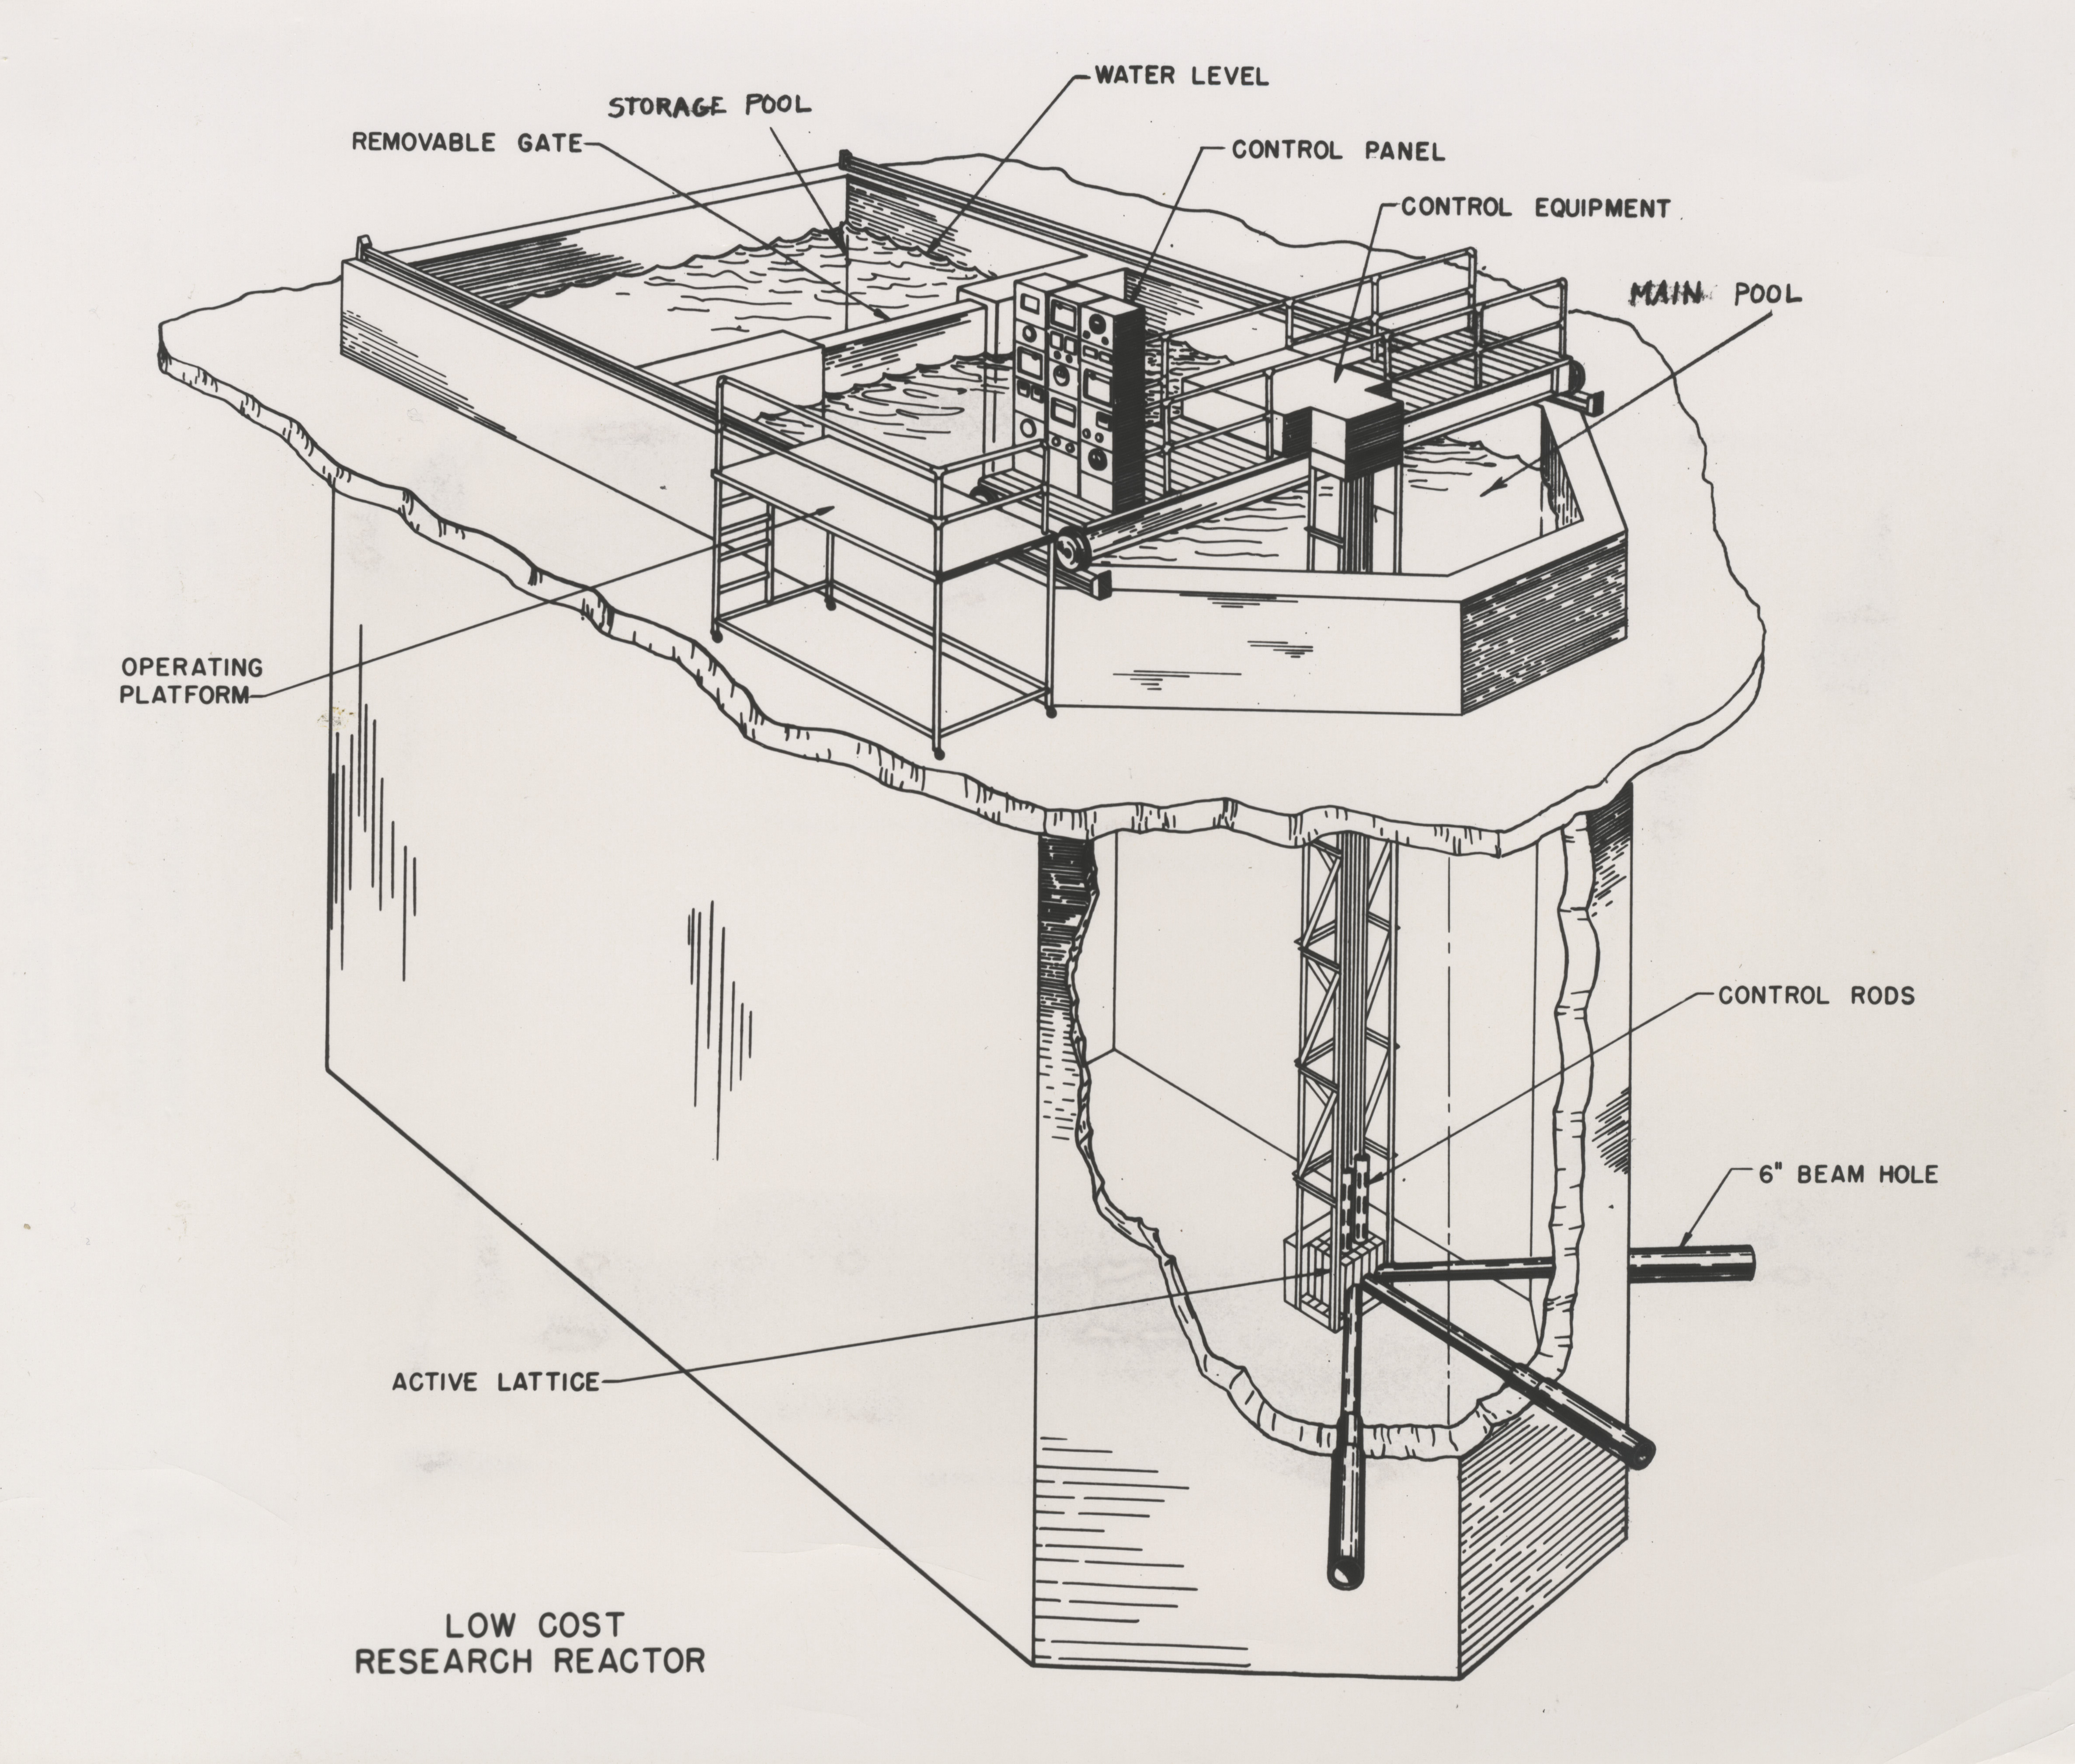 A schematic of the nuclear plant